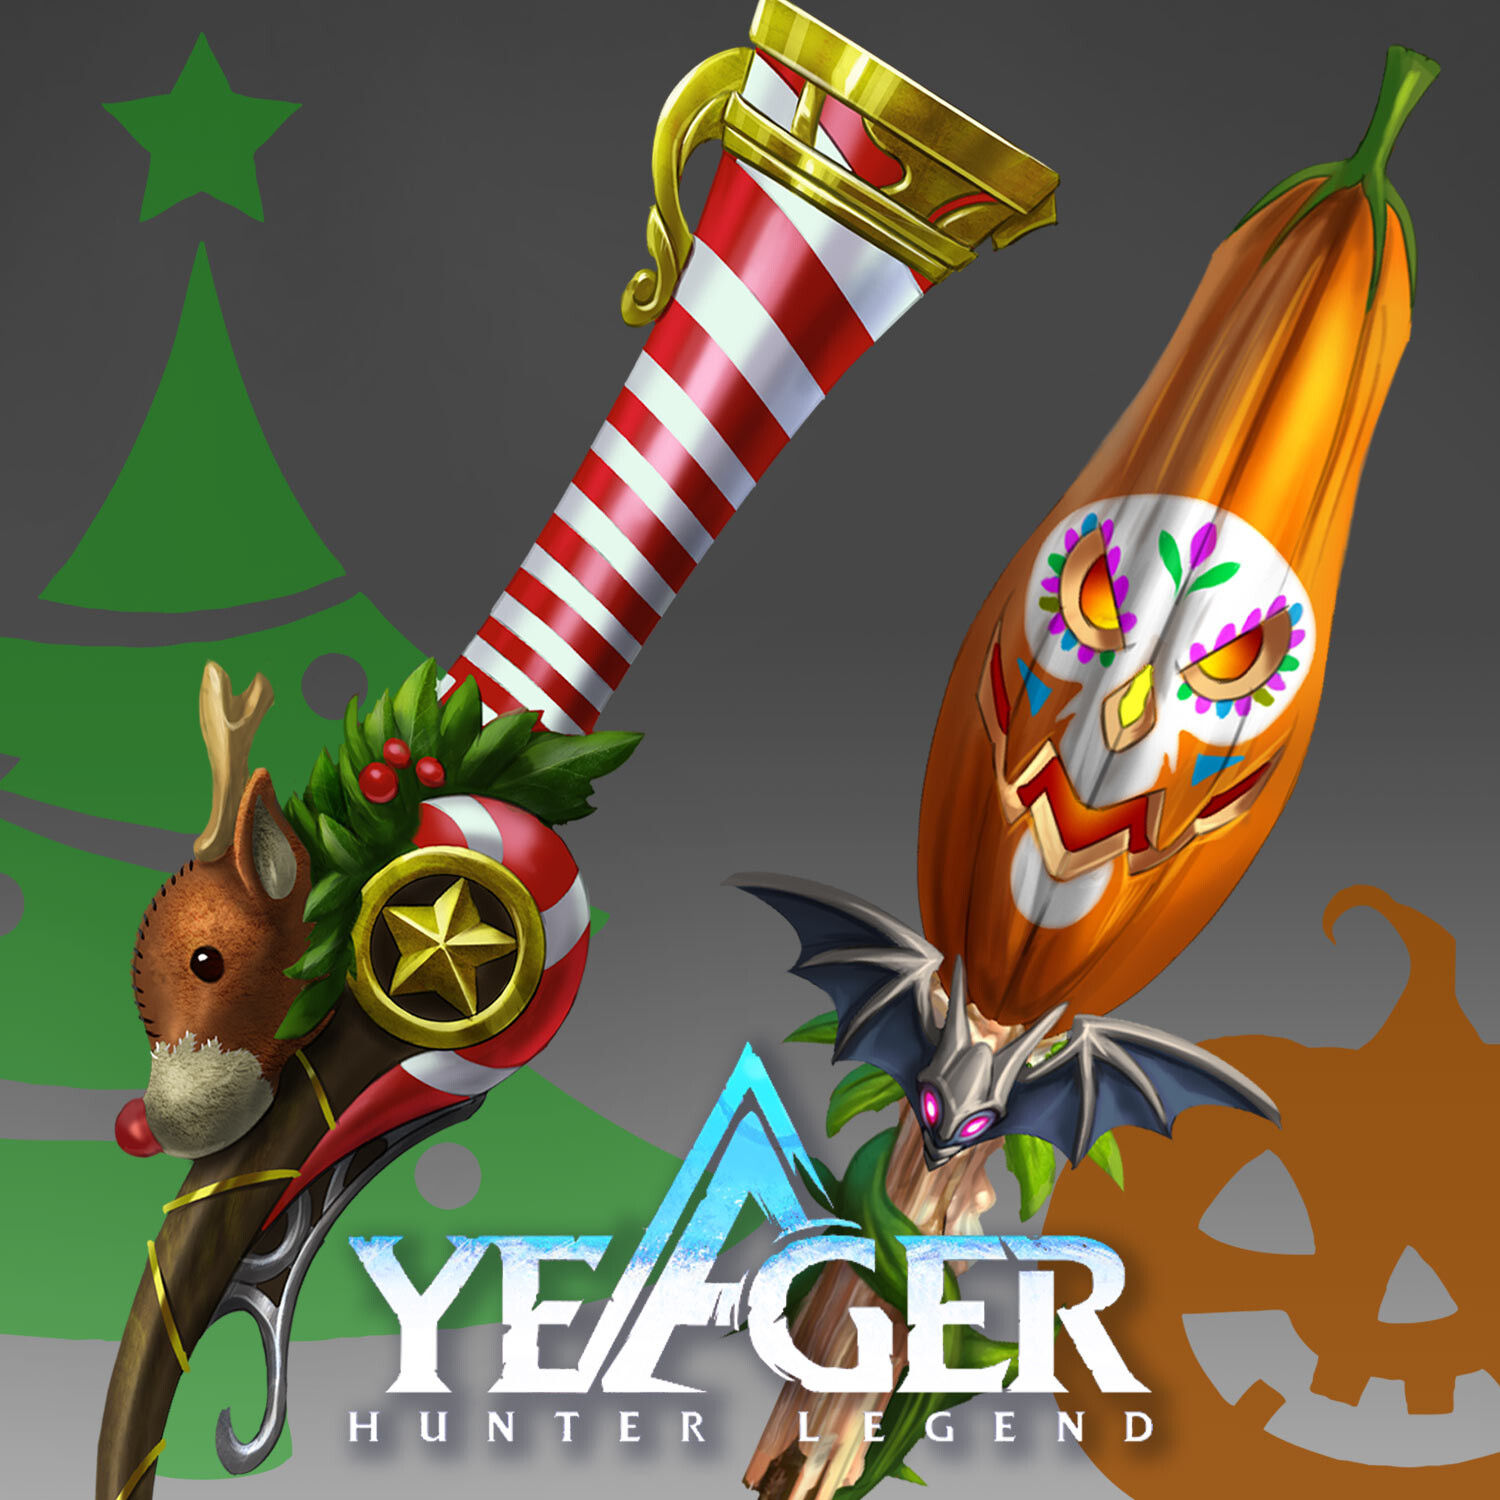 Weapon design - Halloween and Christmas edition YEAGER HUNTER LEGEND